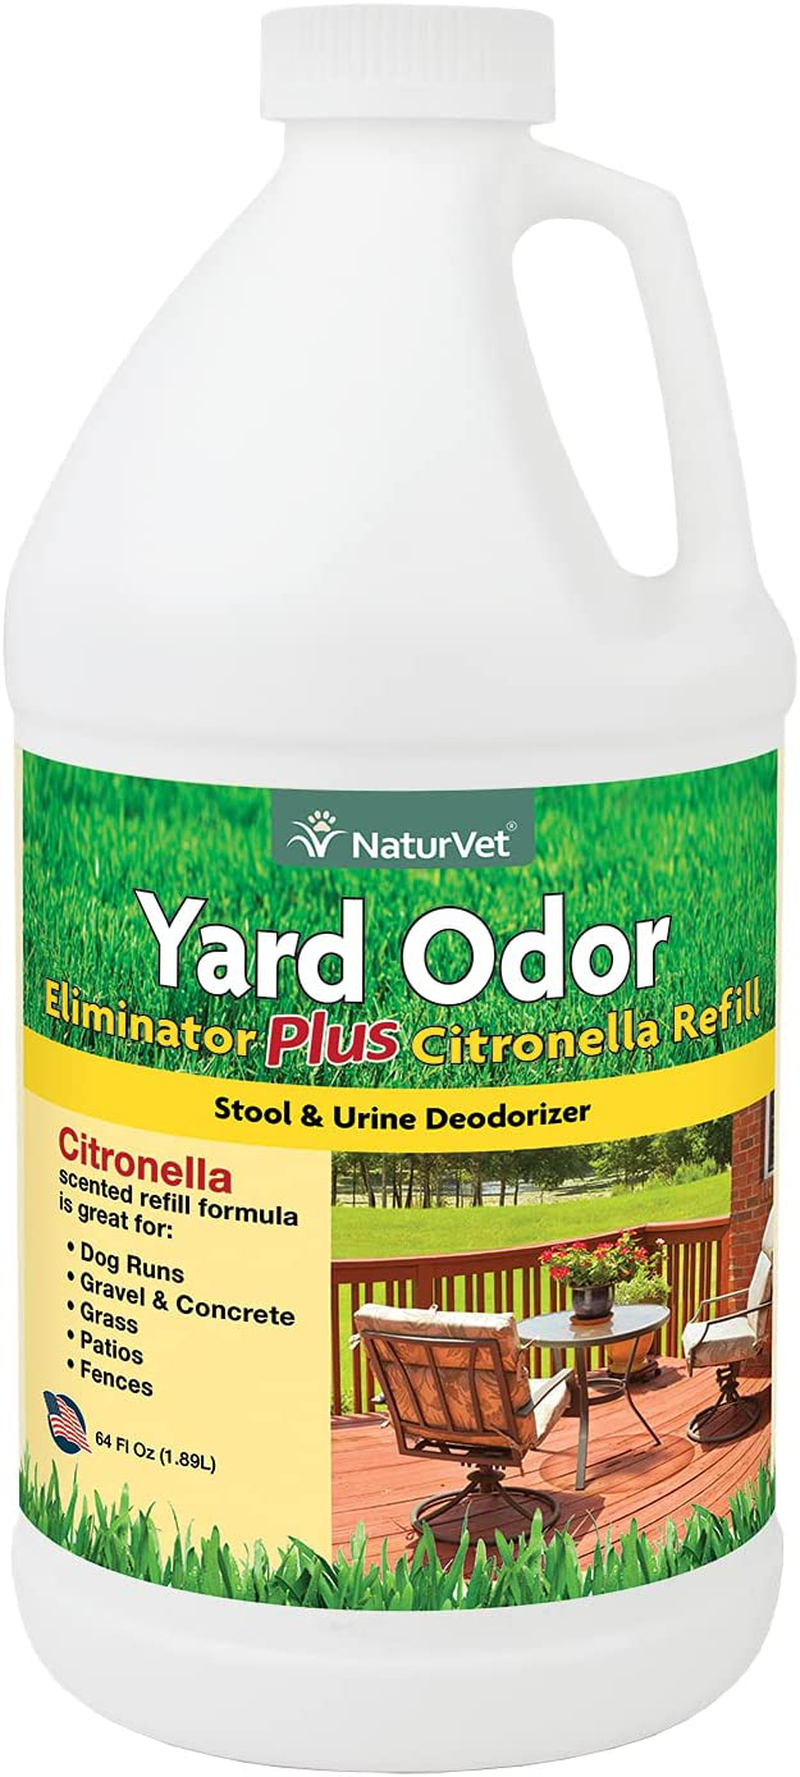 Naturvet – Yard Odor Eliminator plus Citronella Spray – Eliminate Stool and Urine Odors from Lawn and Yard – Designed for Use on Grass, Patios, Gravel, Concrete & More